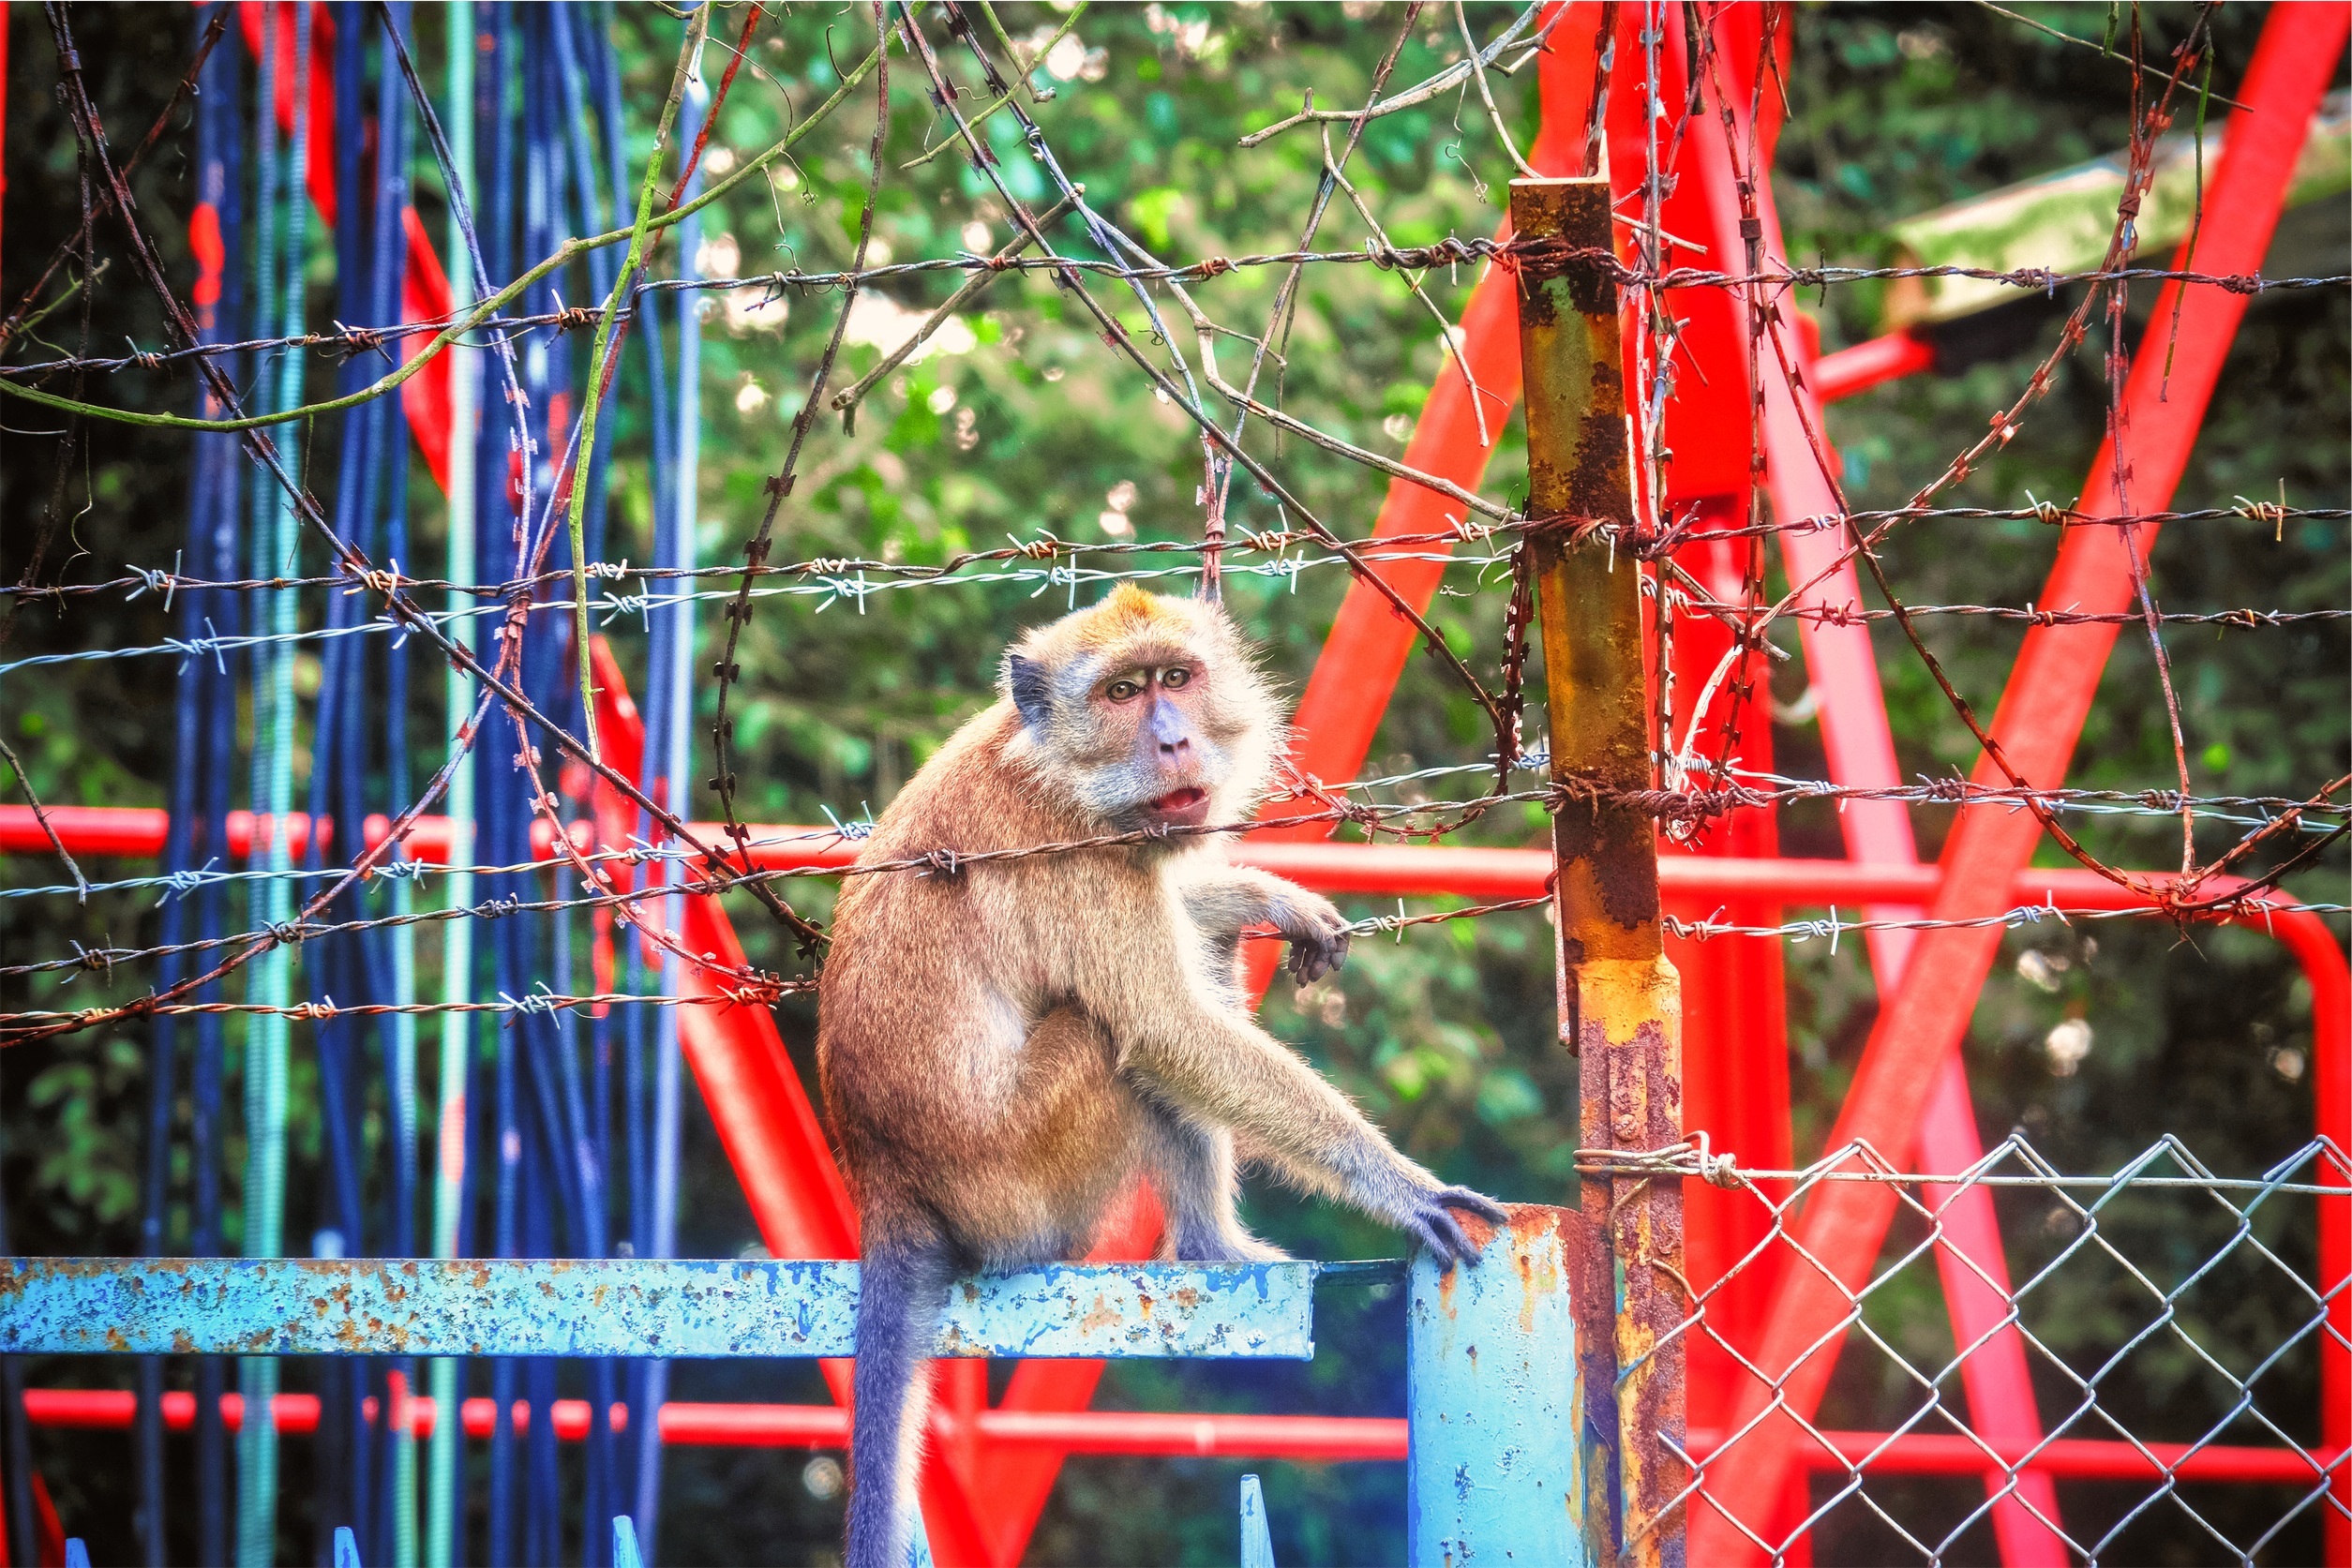 monkey, animals, zoo, barbed wire